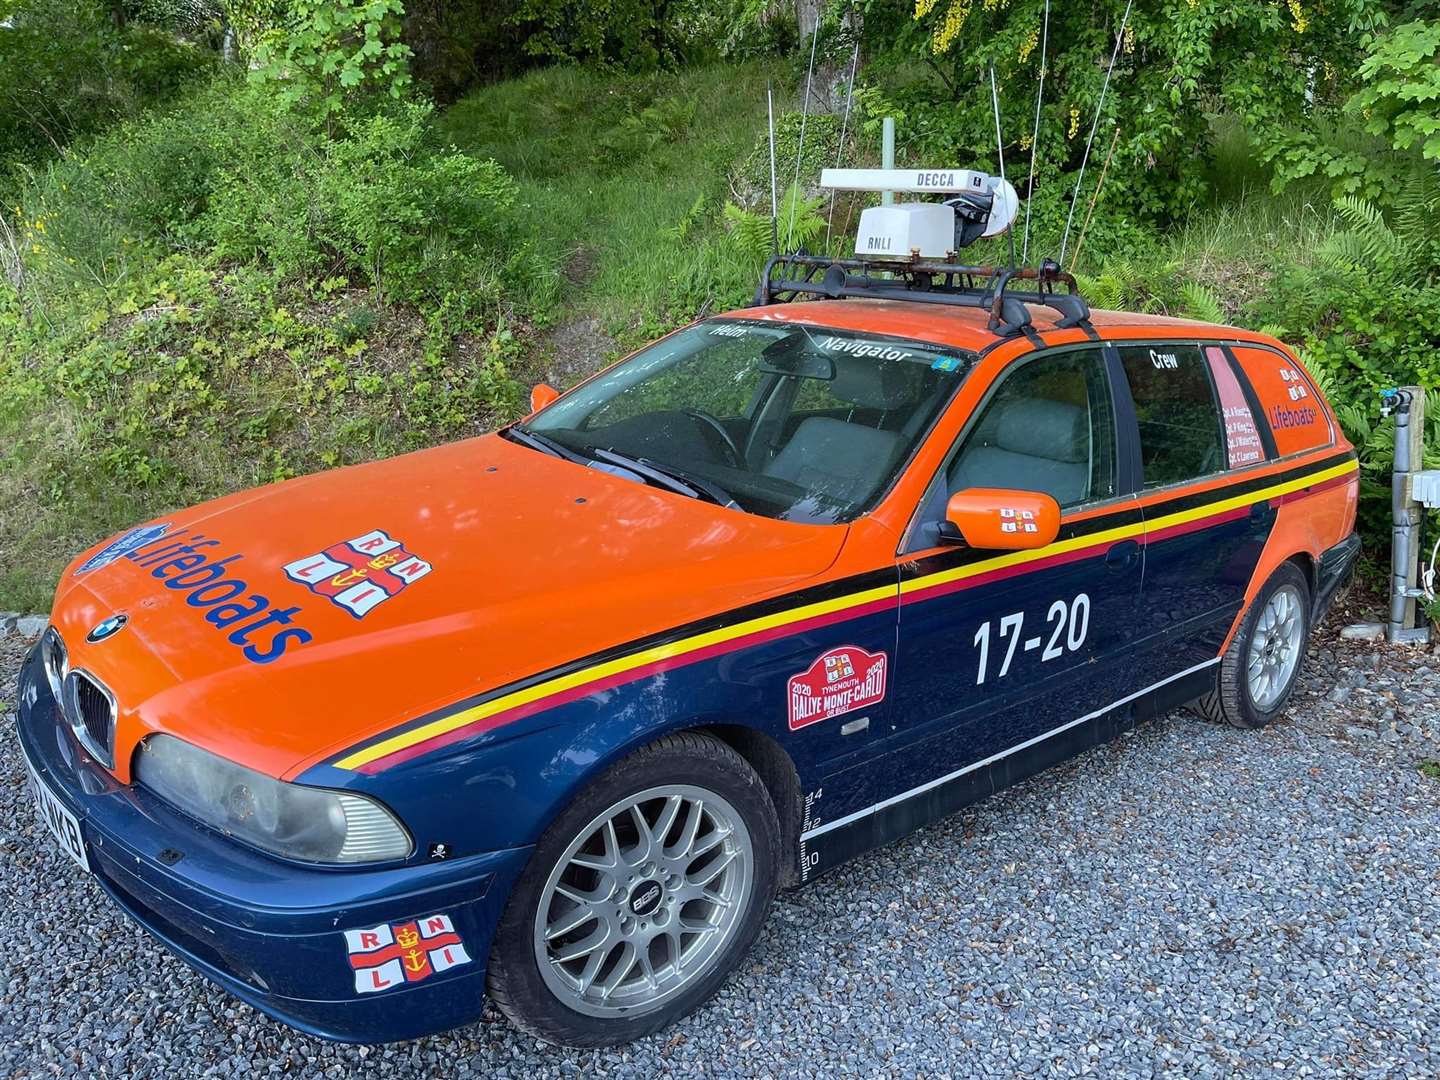 The car will be personalised by the lifeboat team before they set off in July. Picture: RNLI.